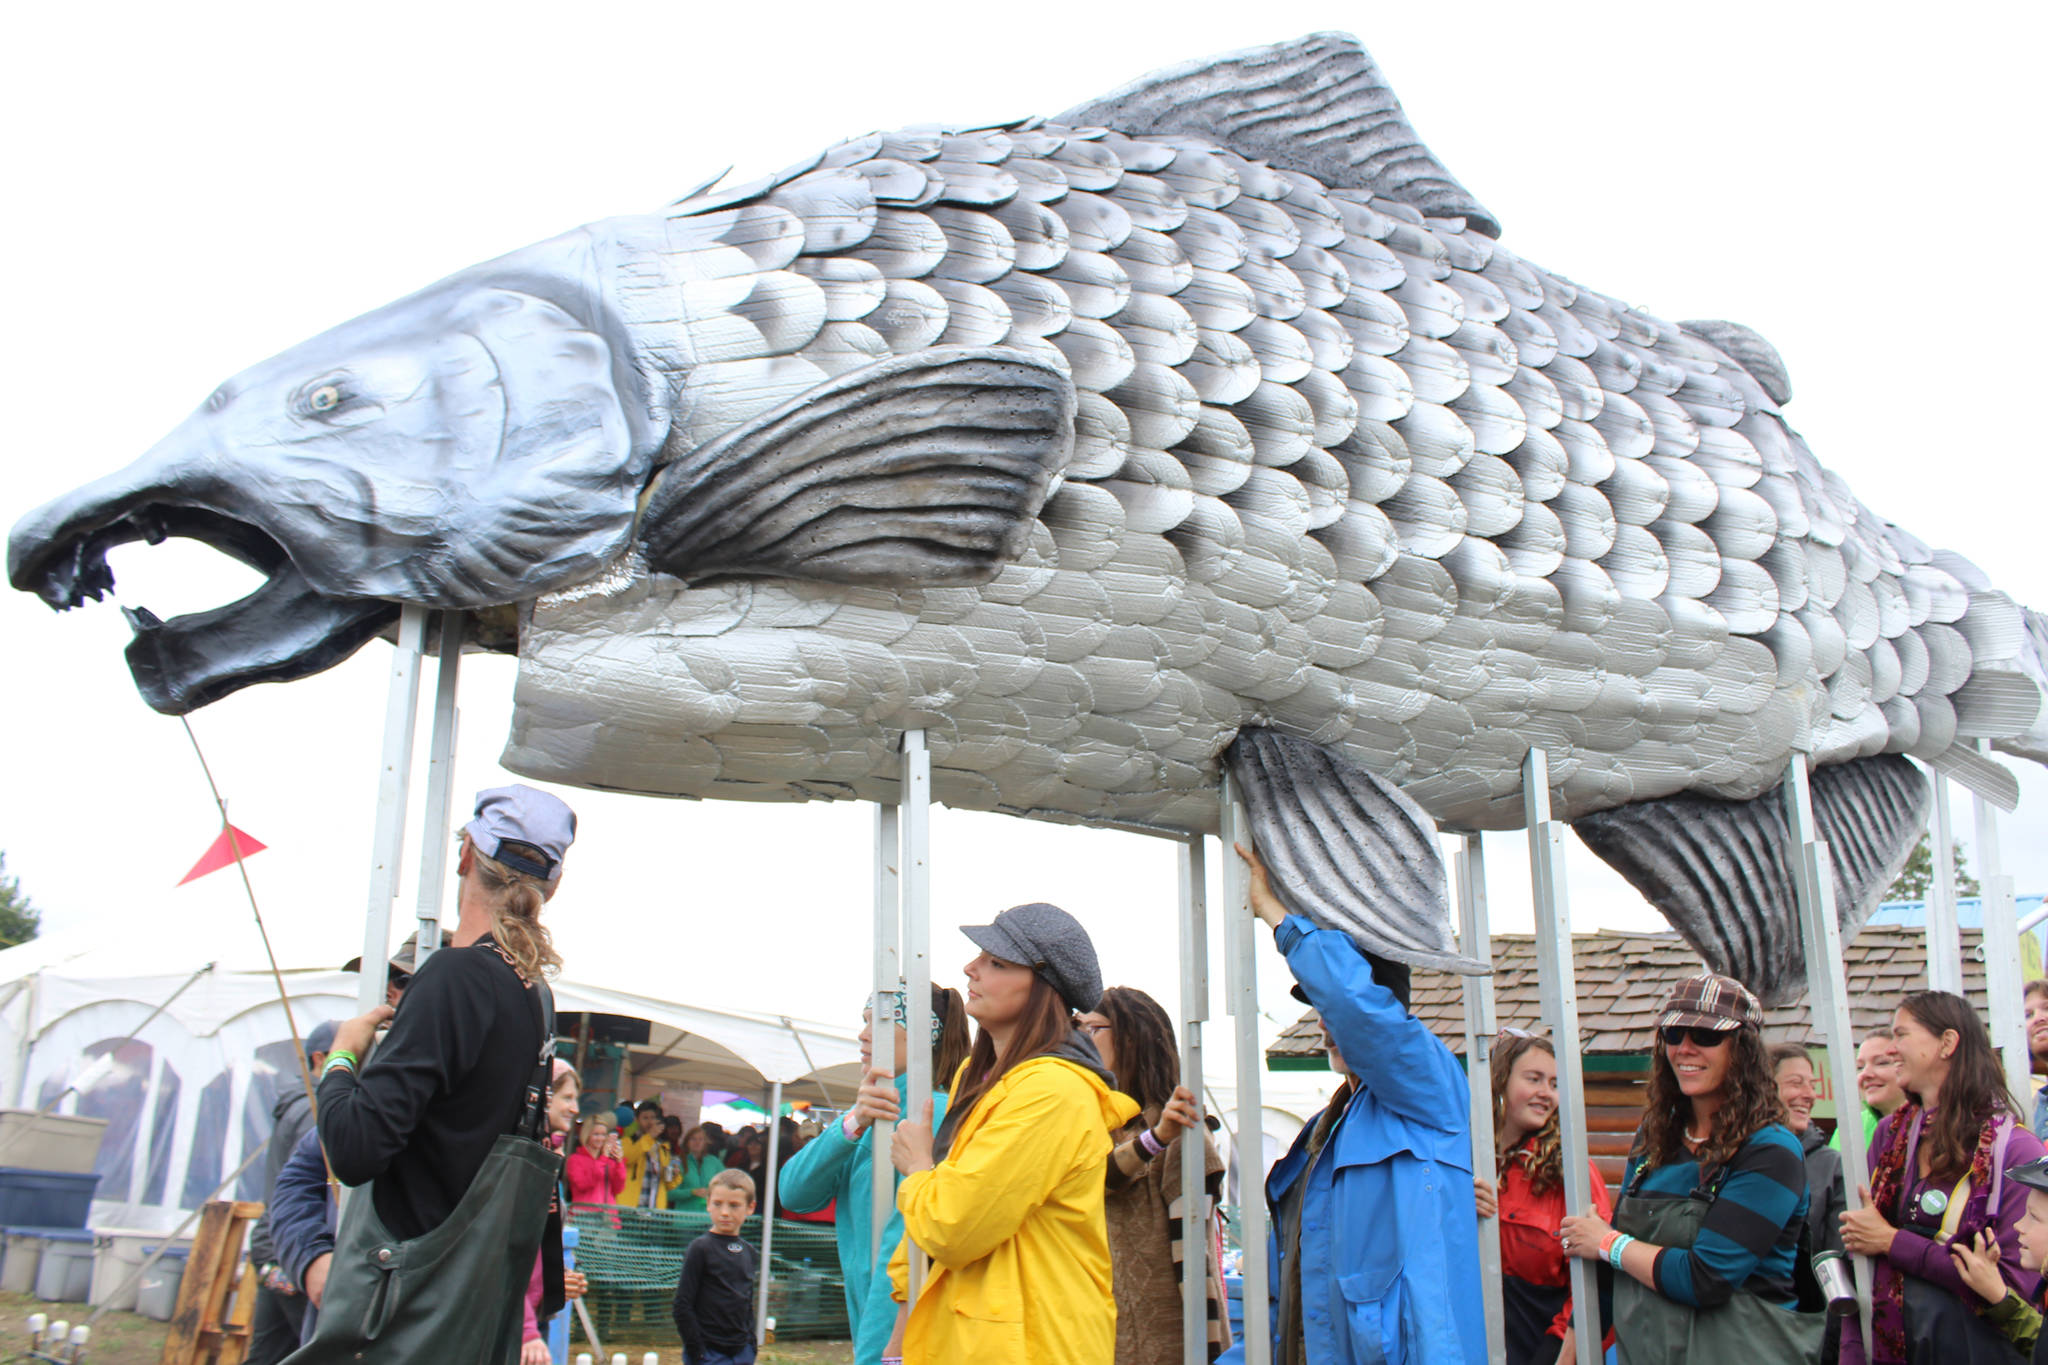 Participants in Salmonfest’s King Sam parade carried a giant salmon puppet throughout the festival grounds, followed by a procession of people celebrating the fish during the 2016 Salmonfest in Ninilchik, Alaska. (File photo by Anna Frost/Homer News)